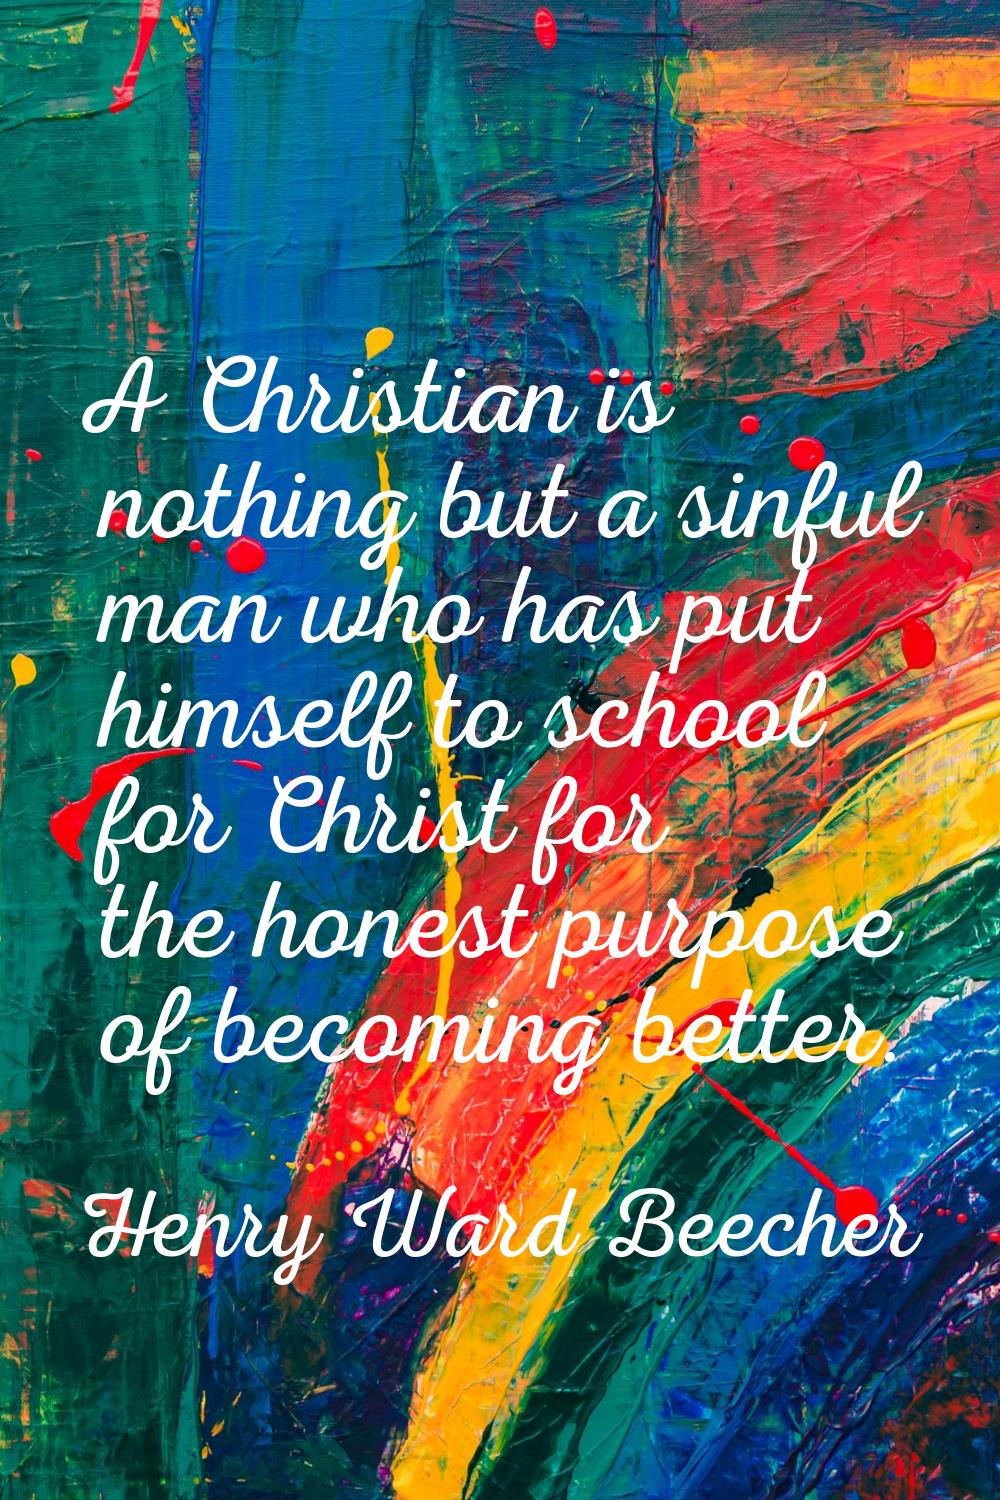 A Christian is nothing but a sinful man who has put himself to school for Christ for the honest pur